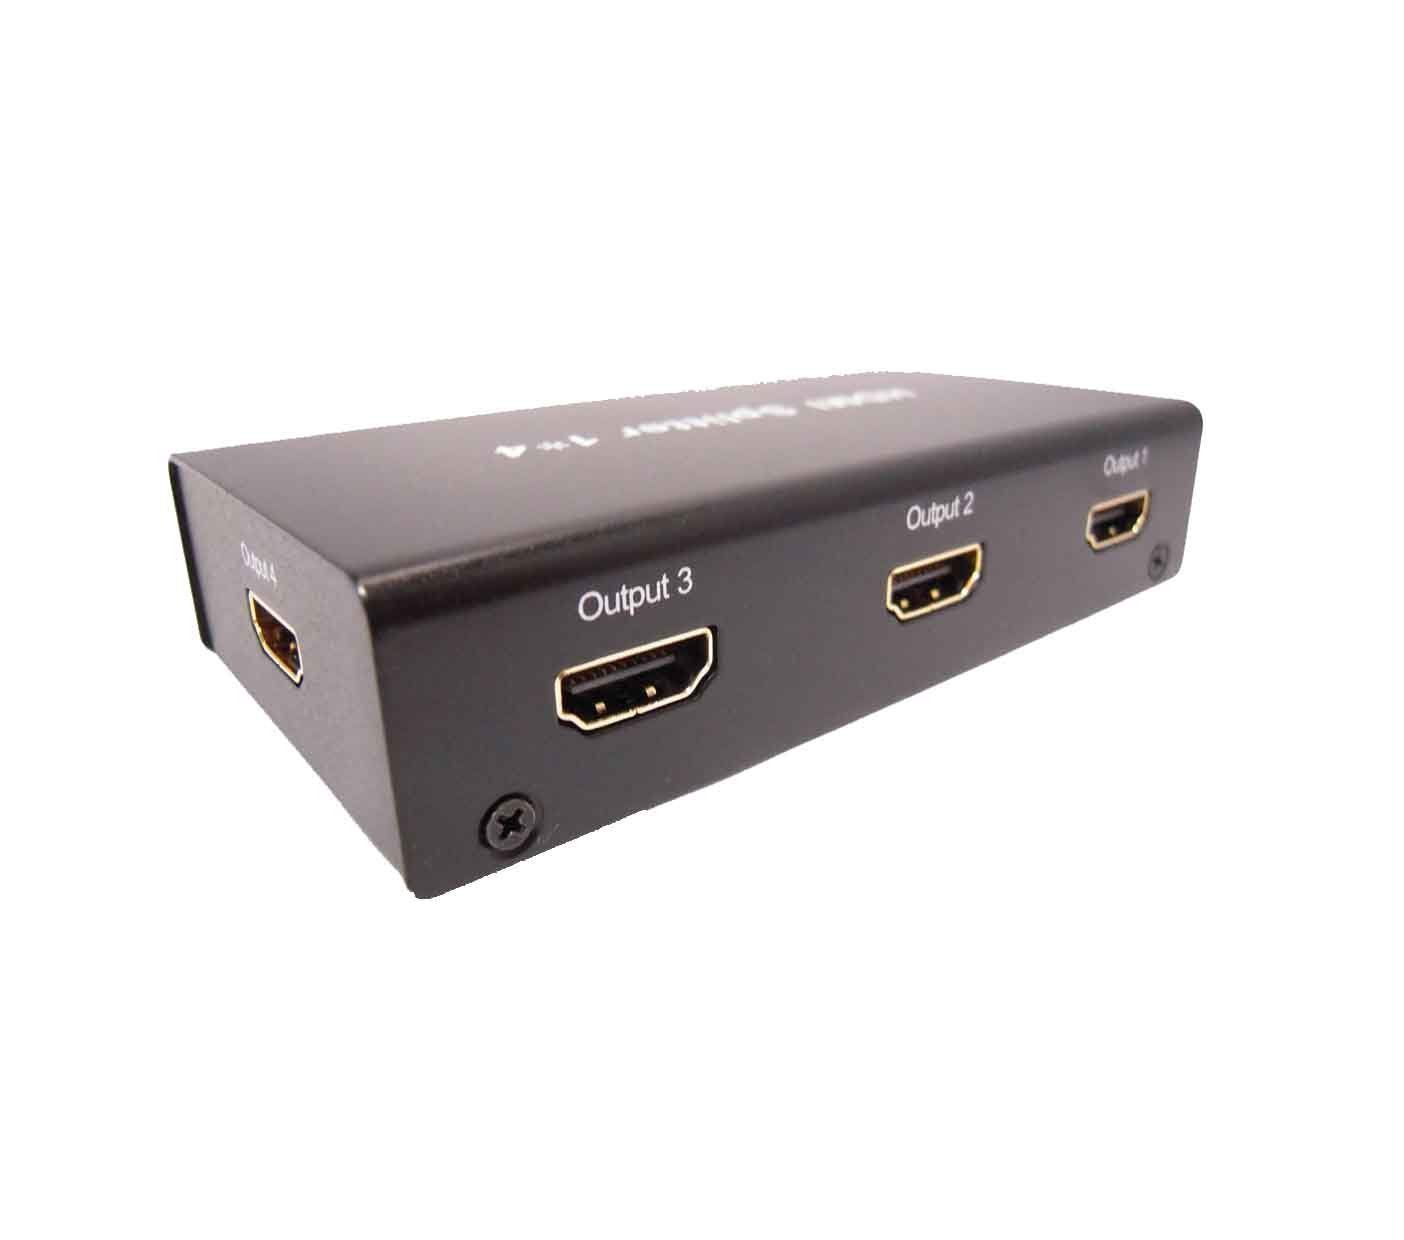 Port HDMI 1x4 Powered Splitter Ver 1.3 Full HD 1080P with HDCP Support, Deep Color, HD Audio